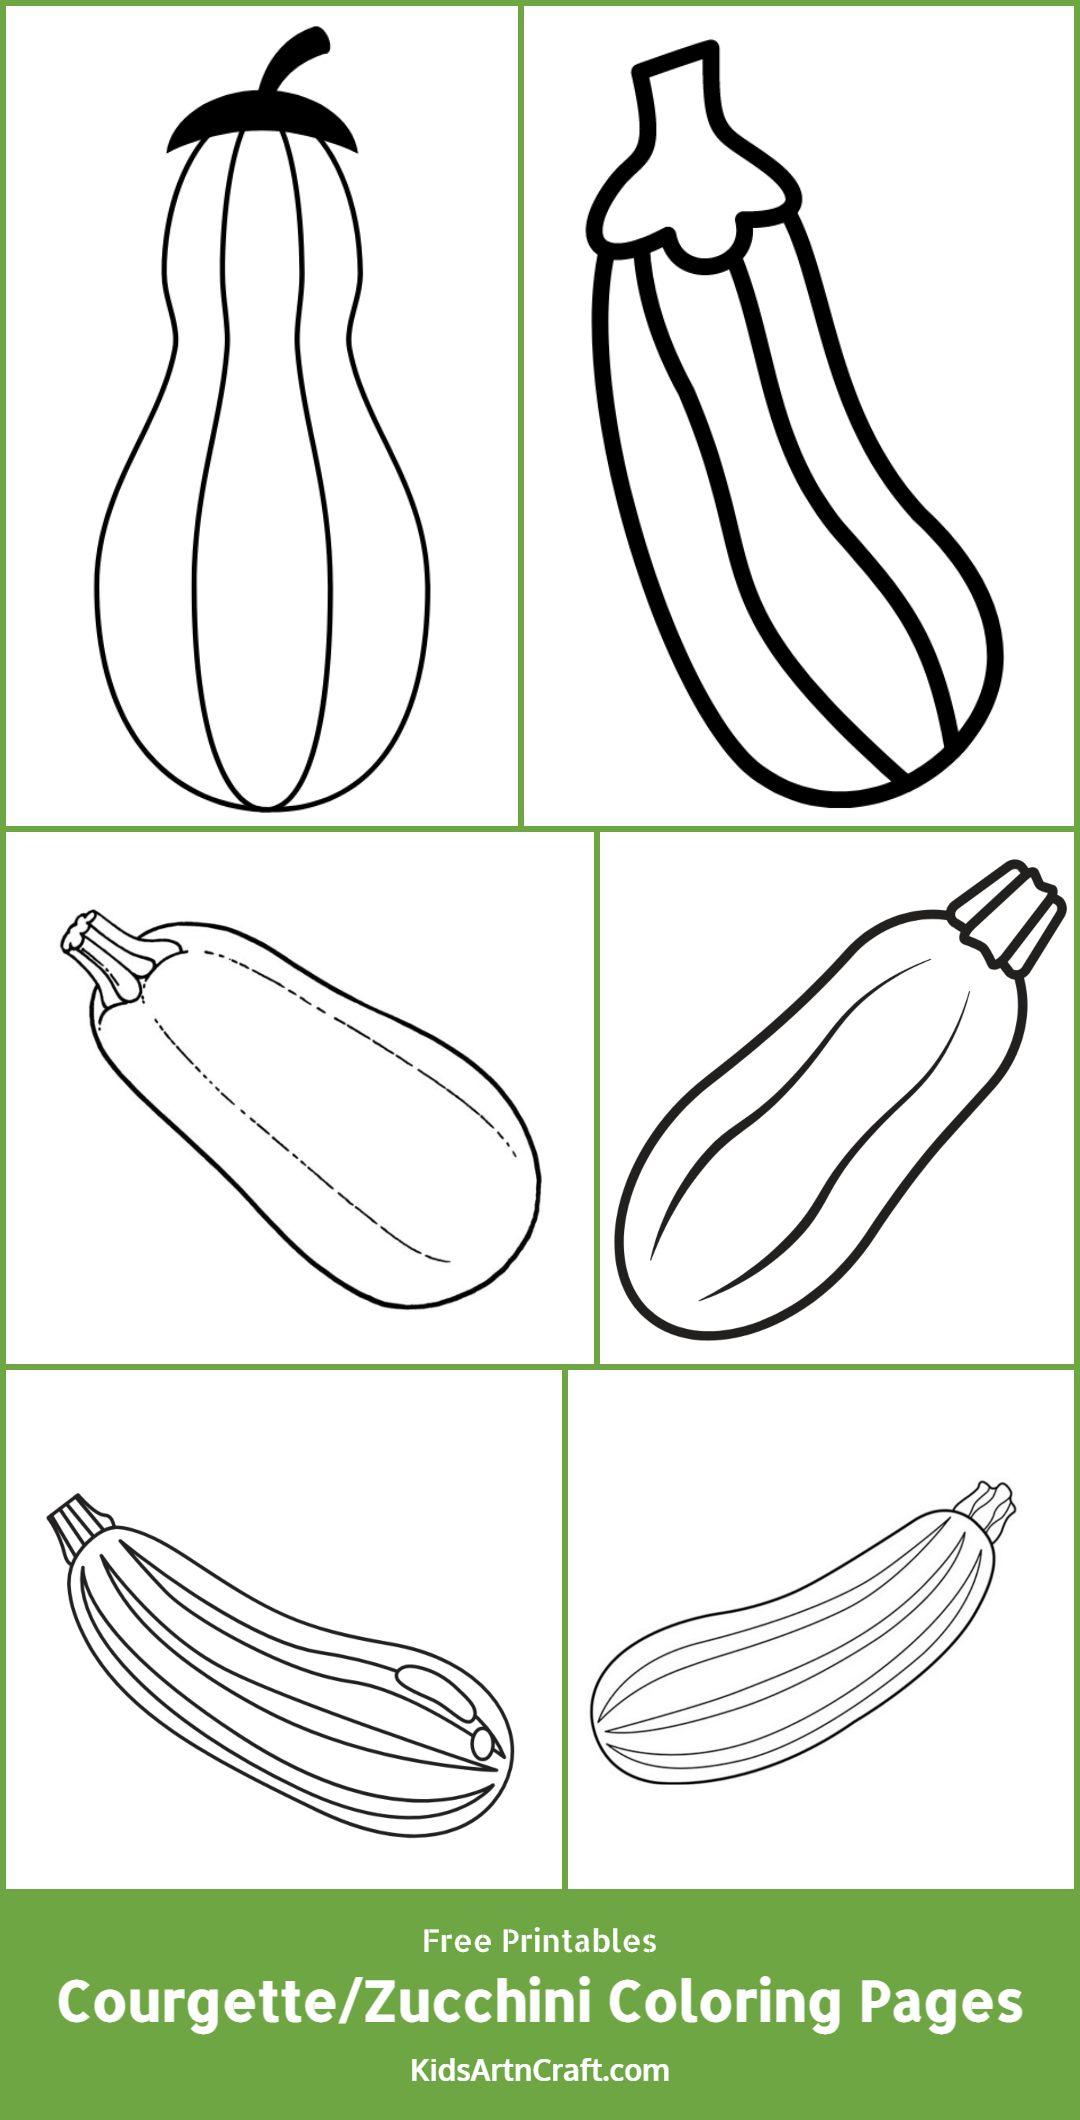 Courgette/Zucchini Coloring Pages For Kids – Free Printables ...